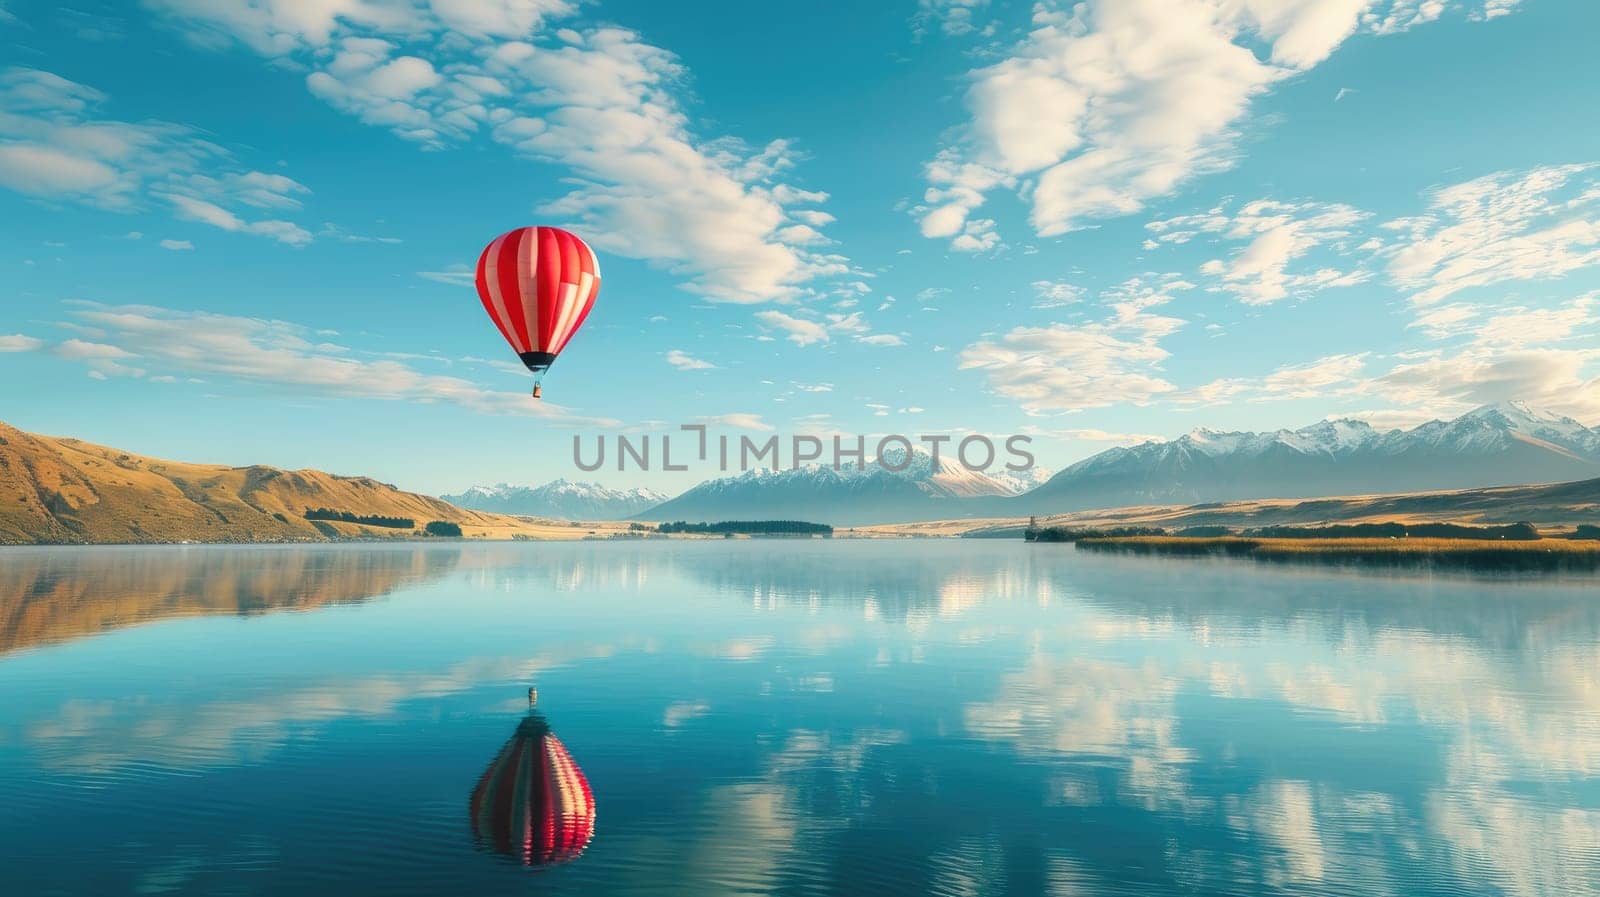 Balloon floating over Lake with copy space area